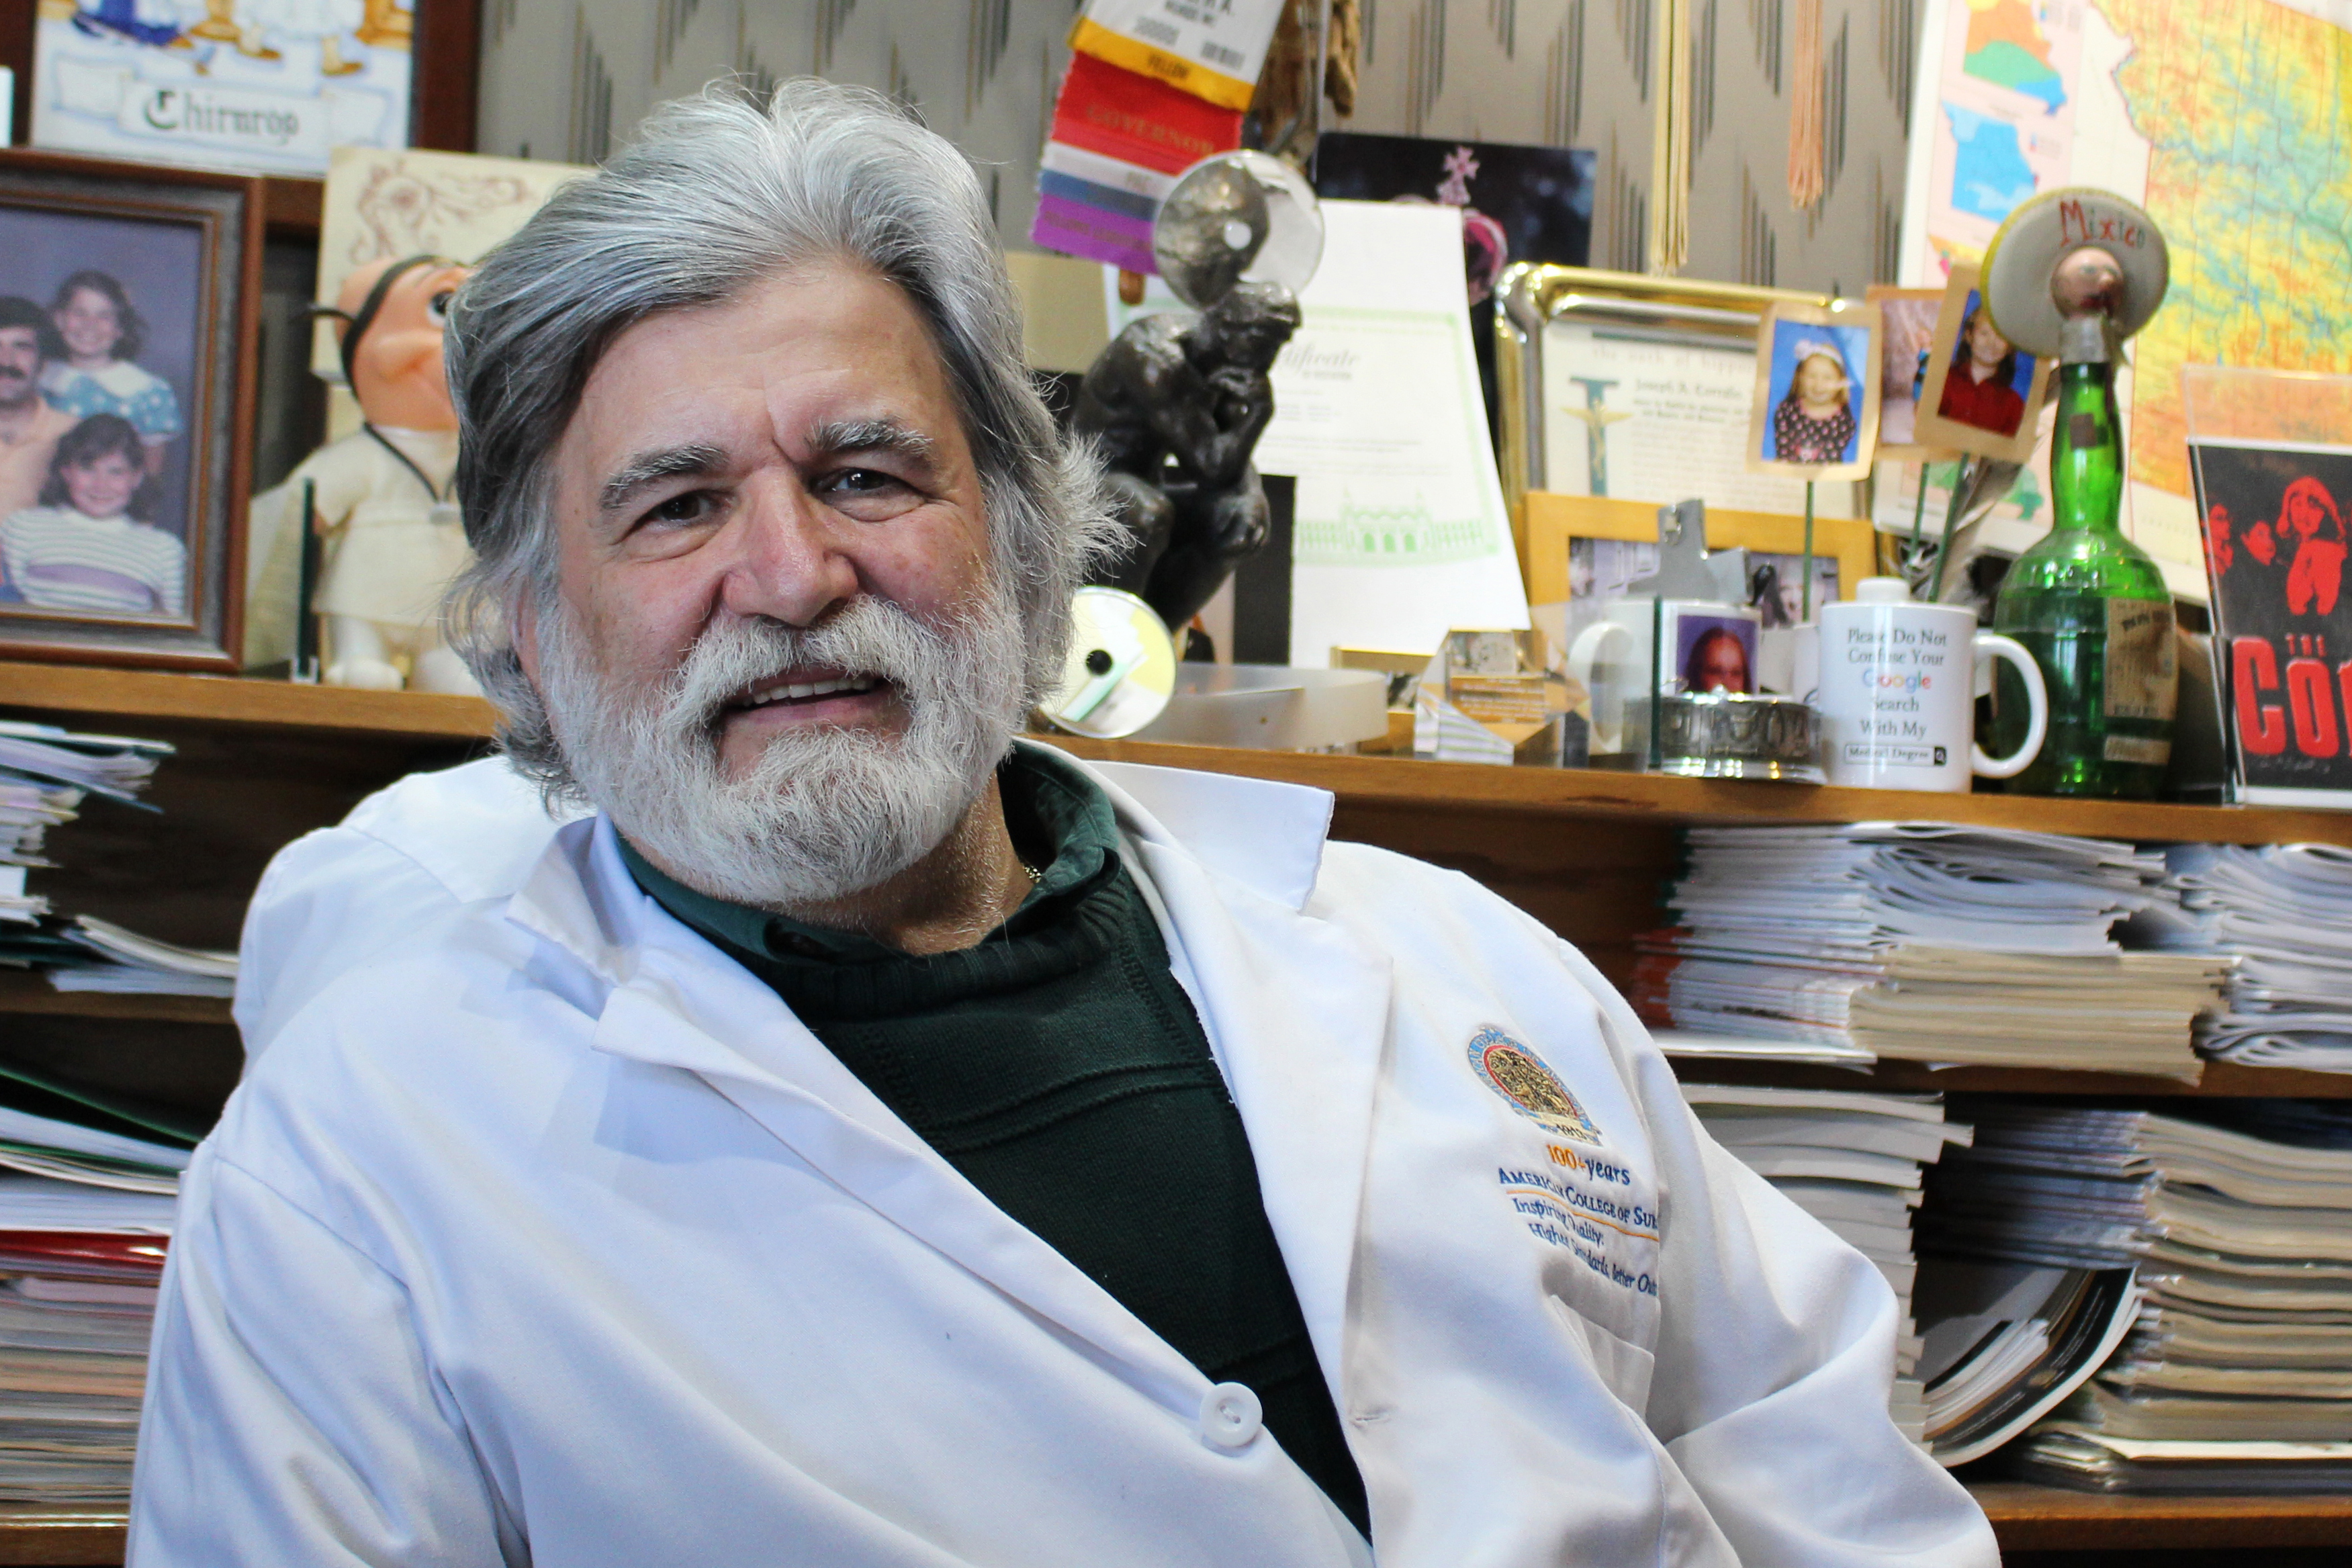 Dr. Joe Corrado is seen posing for a portrait while wearing a white lab coat.